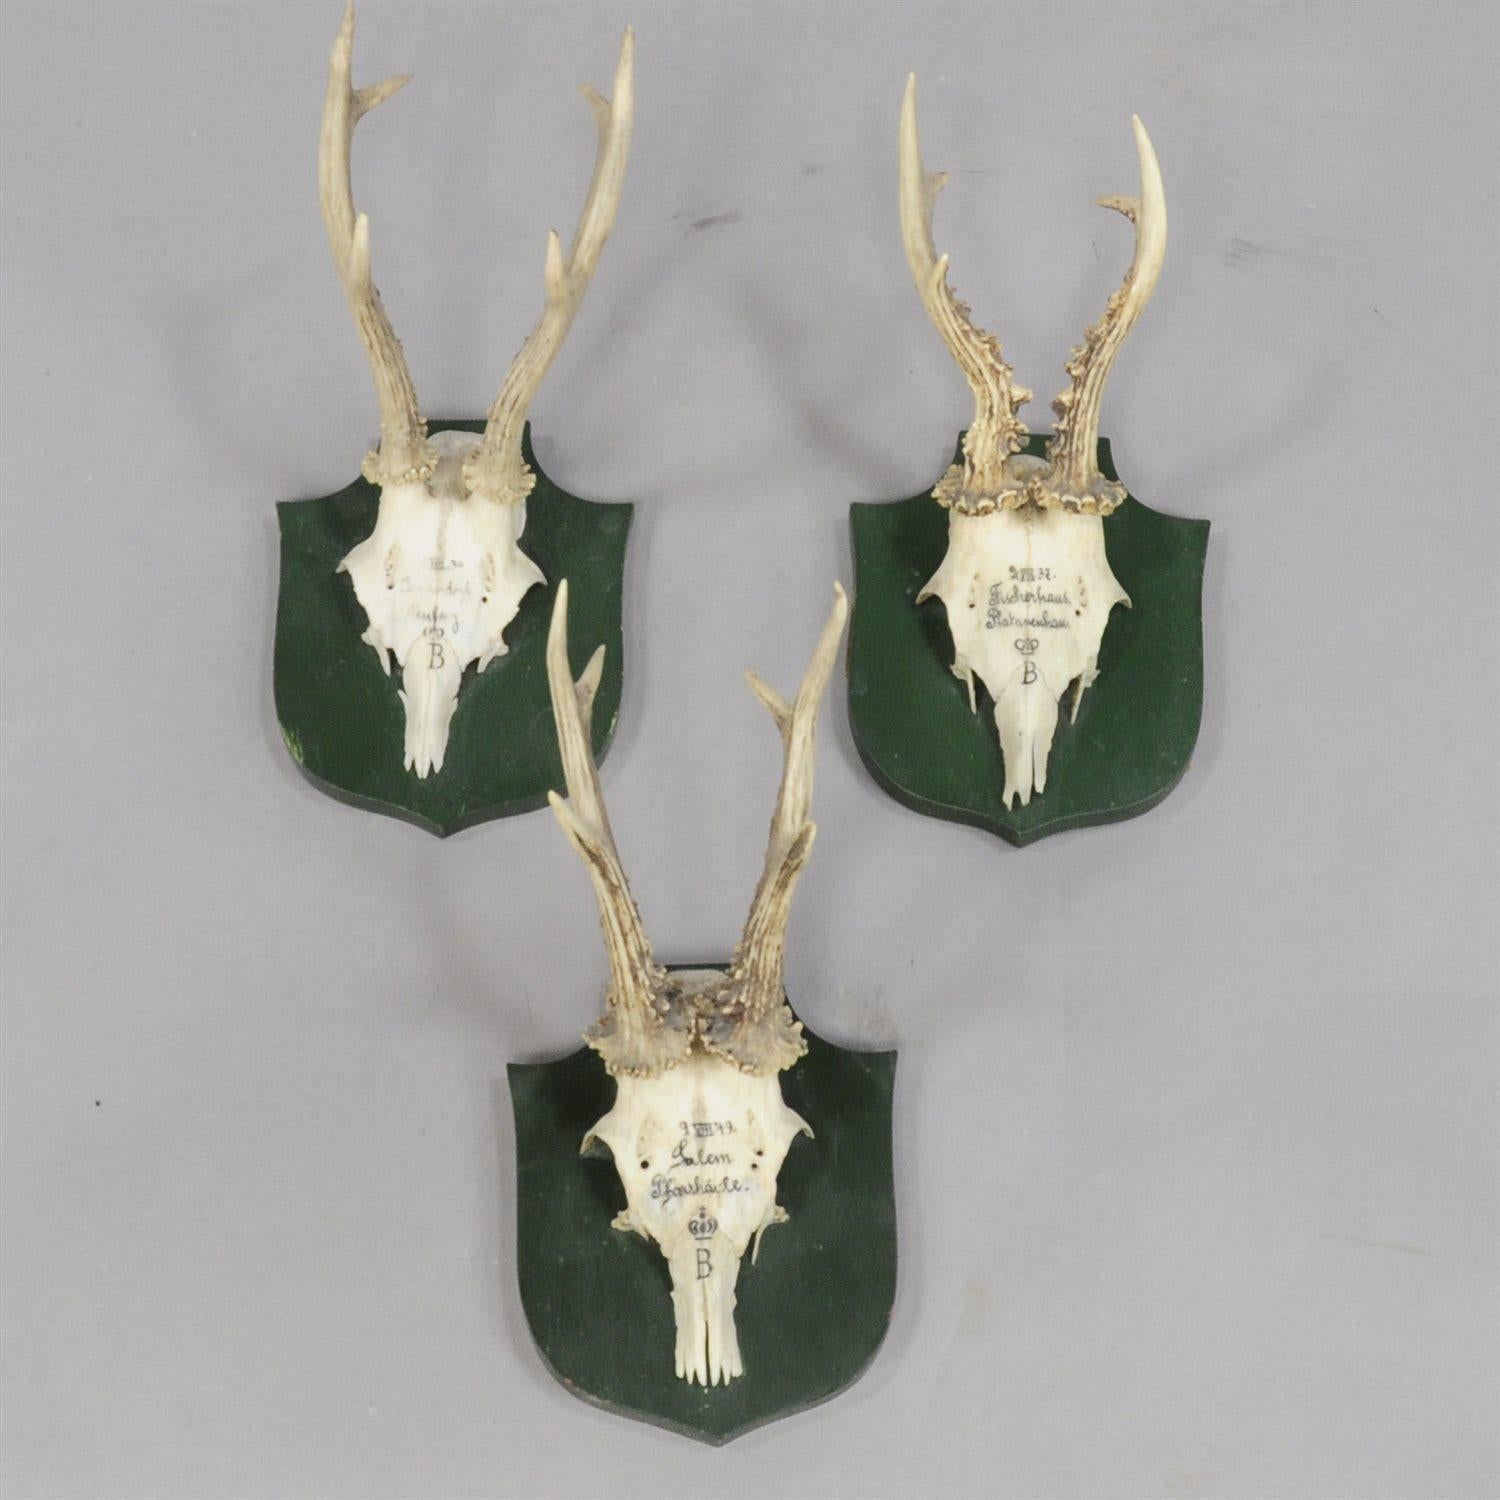 Rustic Six Great Black Forest Deer Trophies from Palace Salem